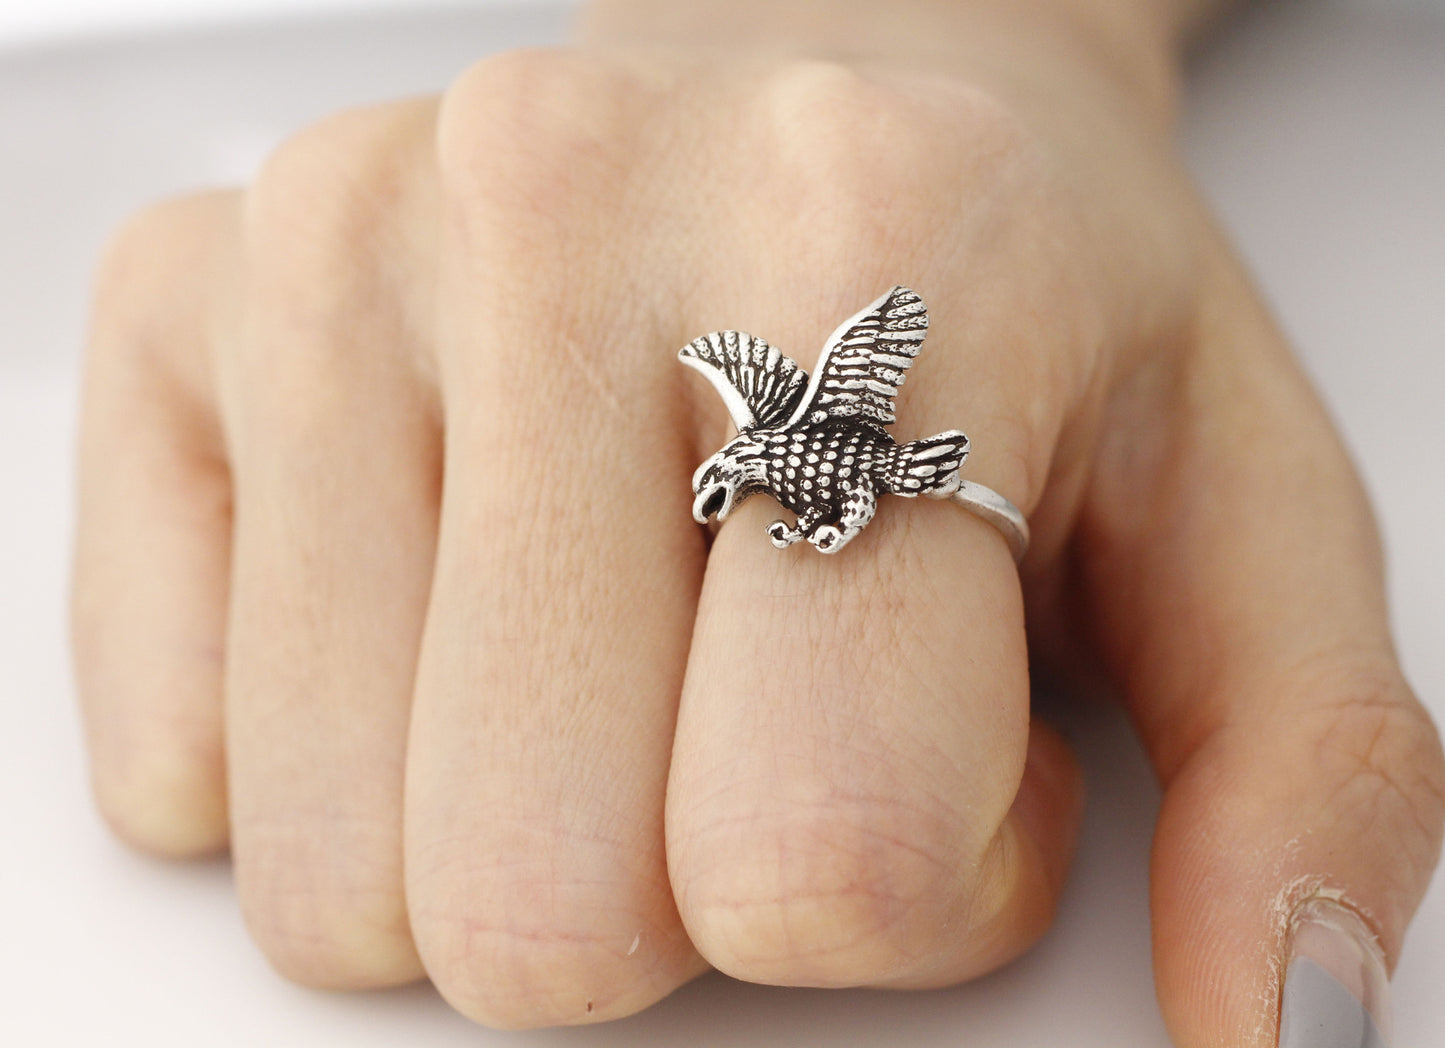 Eagle ring, retro eagle ring, retro ring, vintage ring, Eagle adjutable ring in 2 colors, R0330S